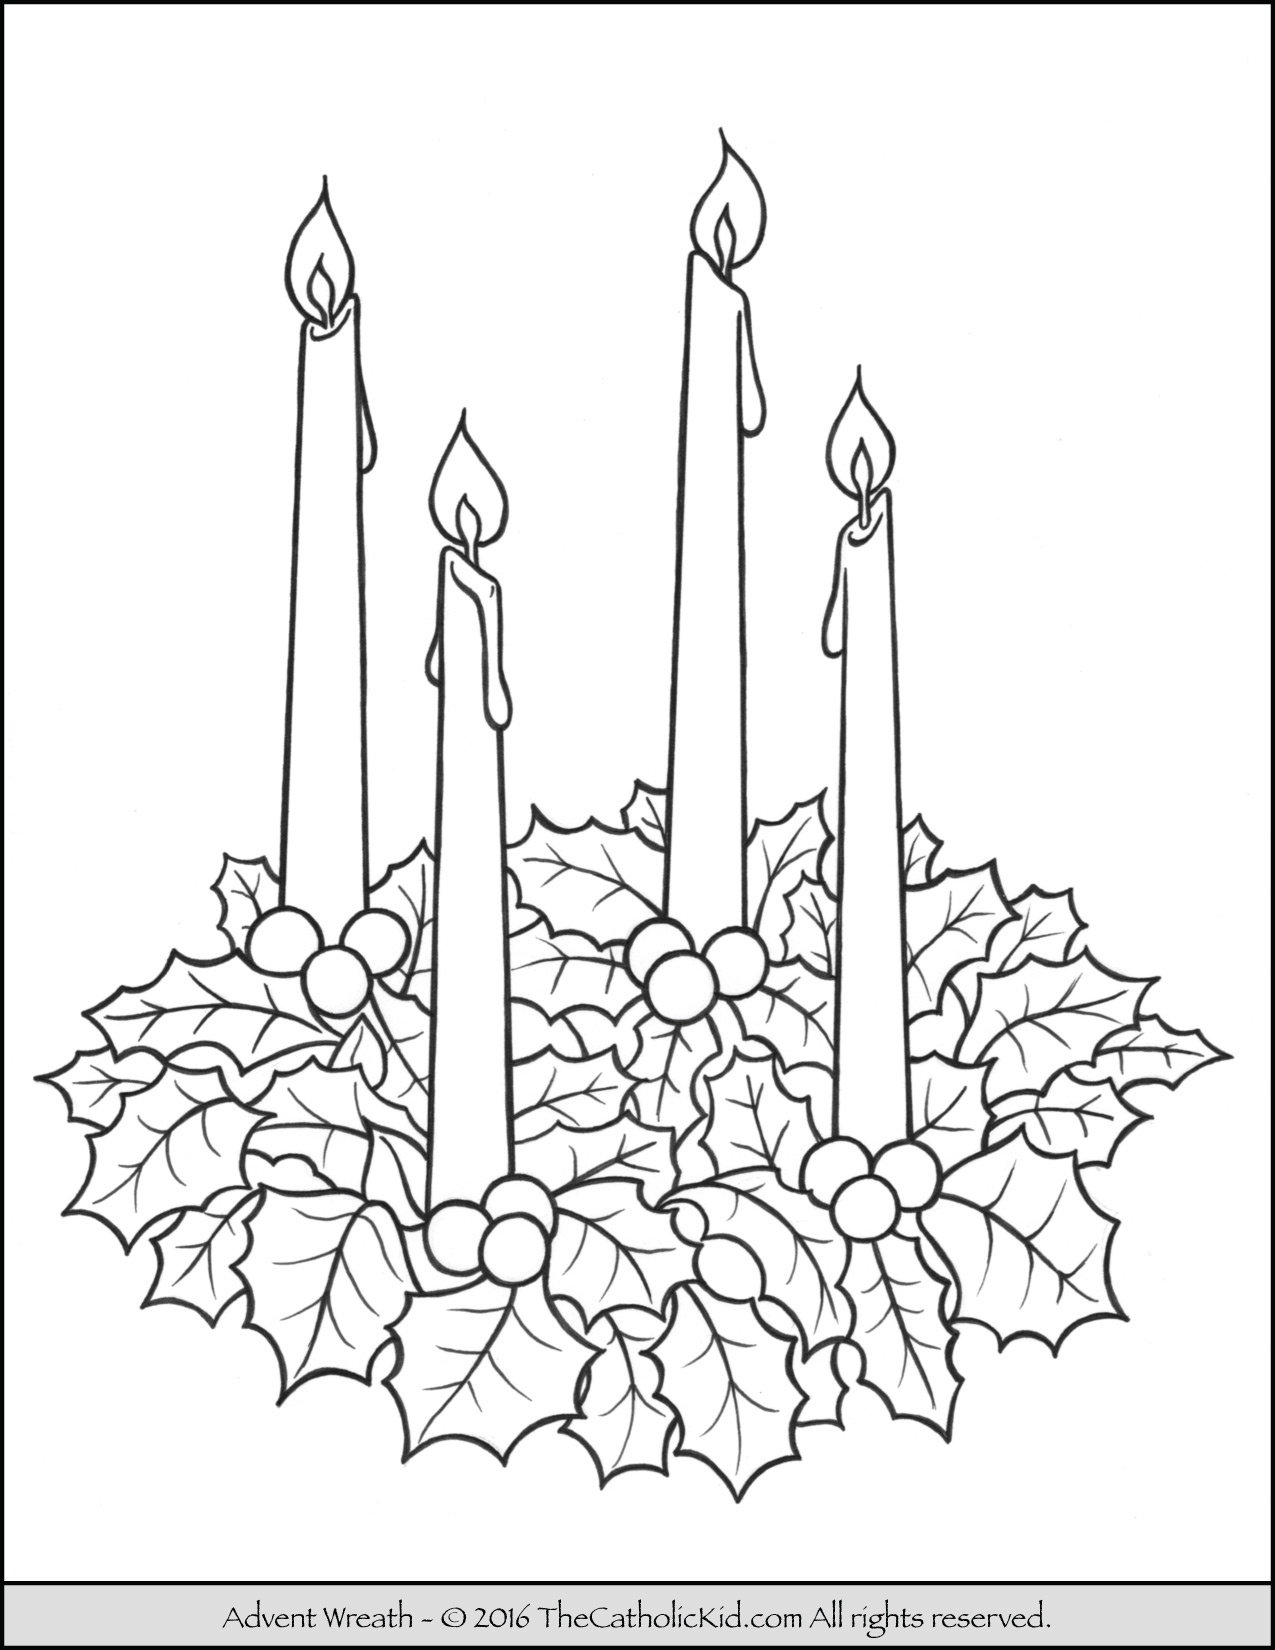 Advent Wreath Coloring Page Free Printable Advent Wreath Free